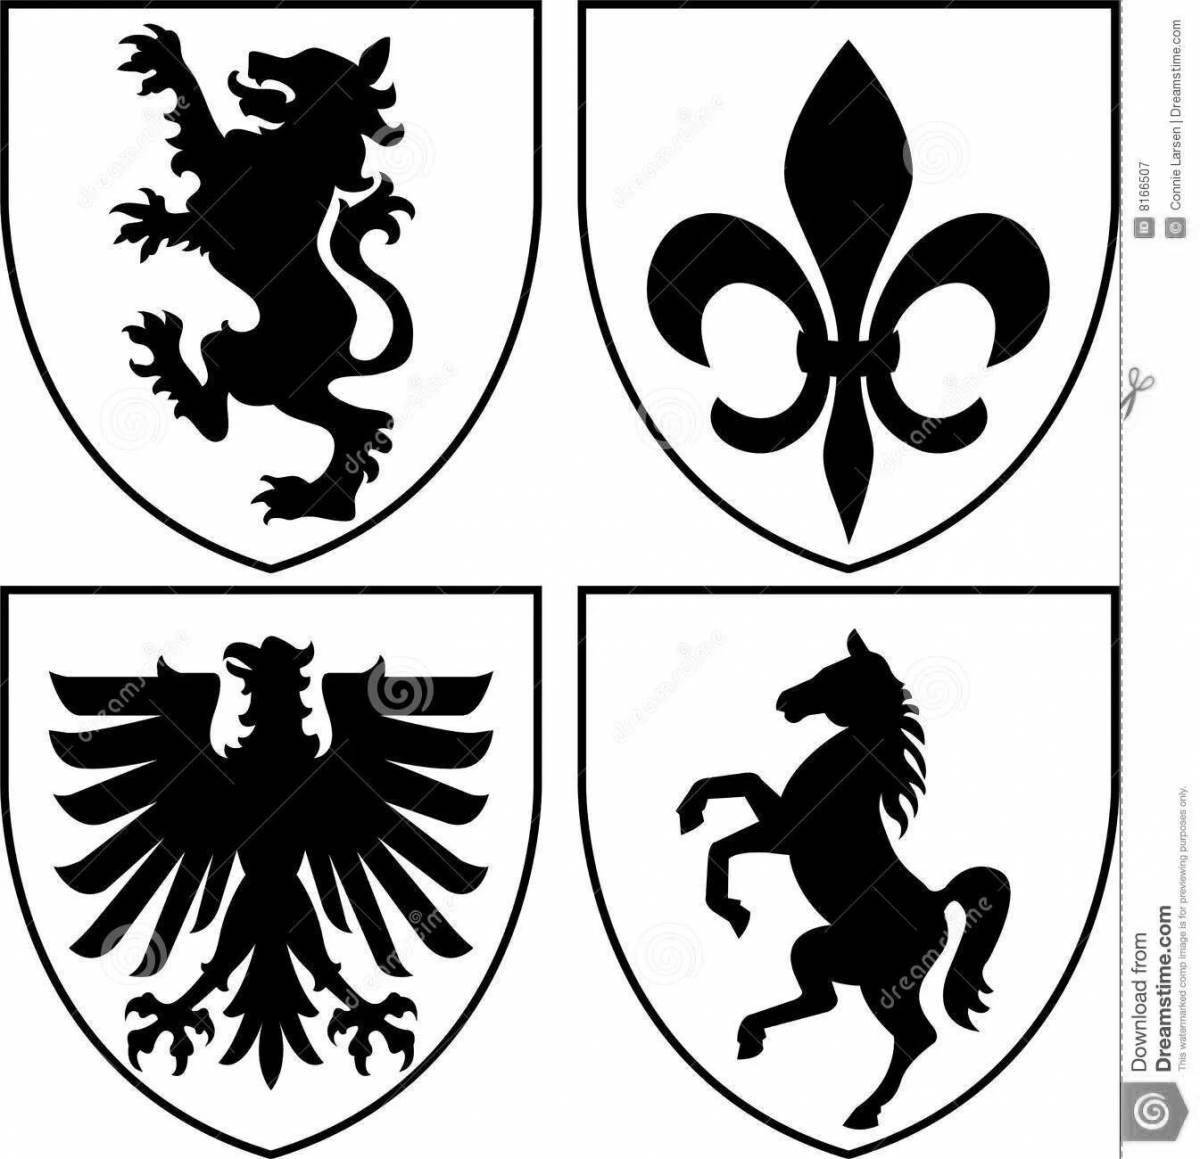 Exalted knight coat of arms coloring page